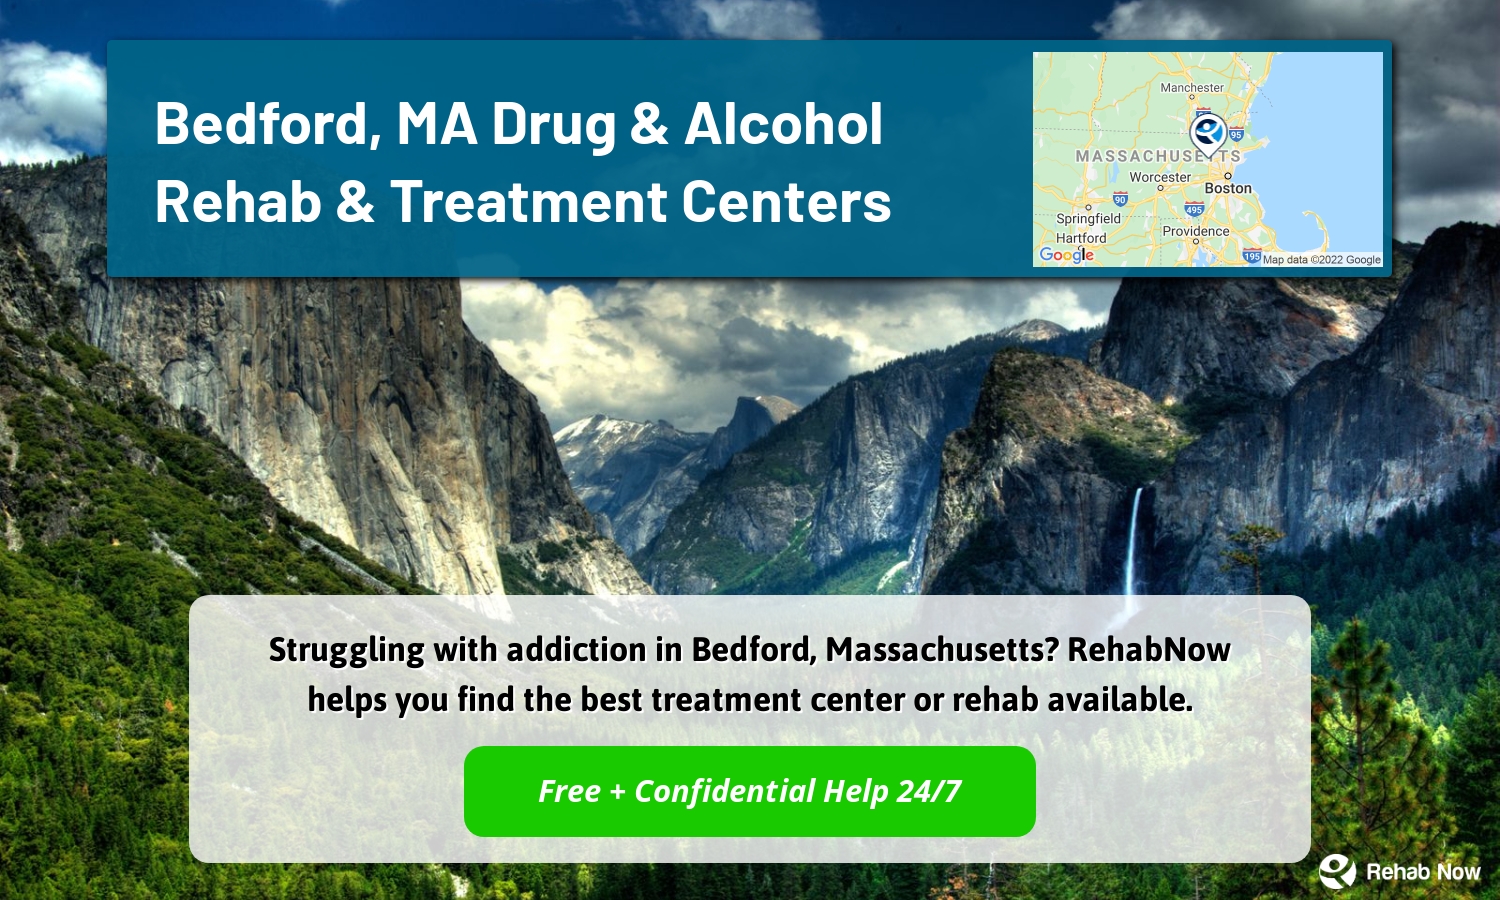 Struggling with addiction in Bedford, Massachusetts? RehabNow helps you find the best treatment center or rehab available.